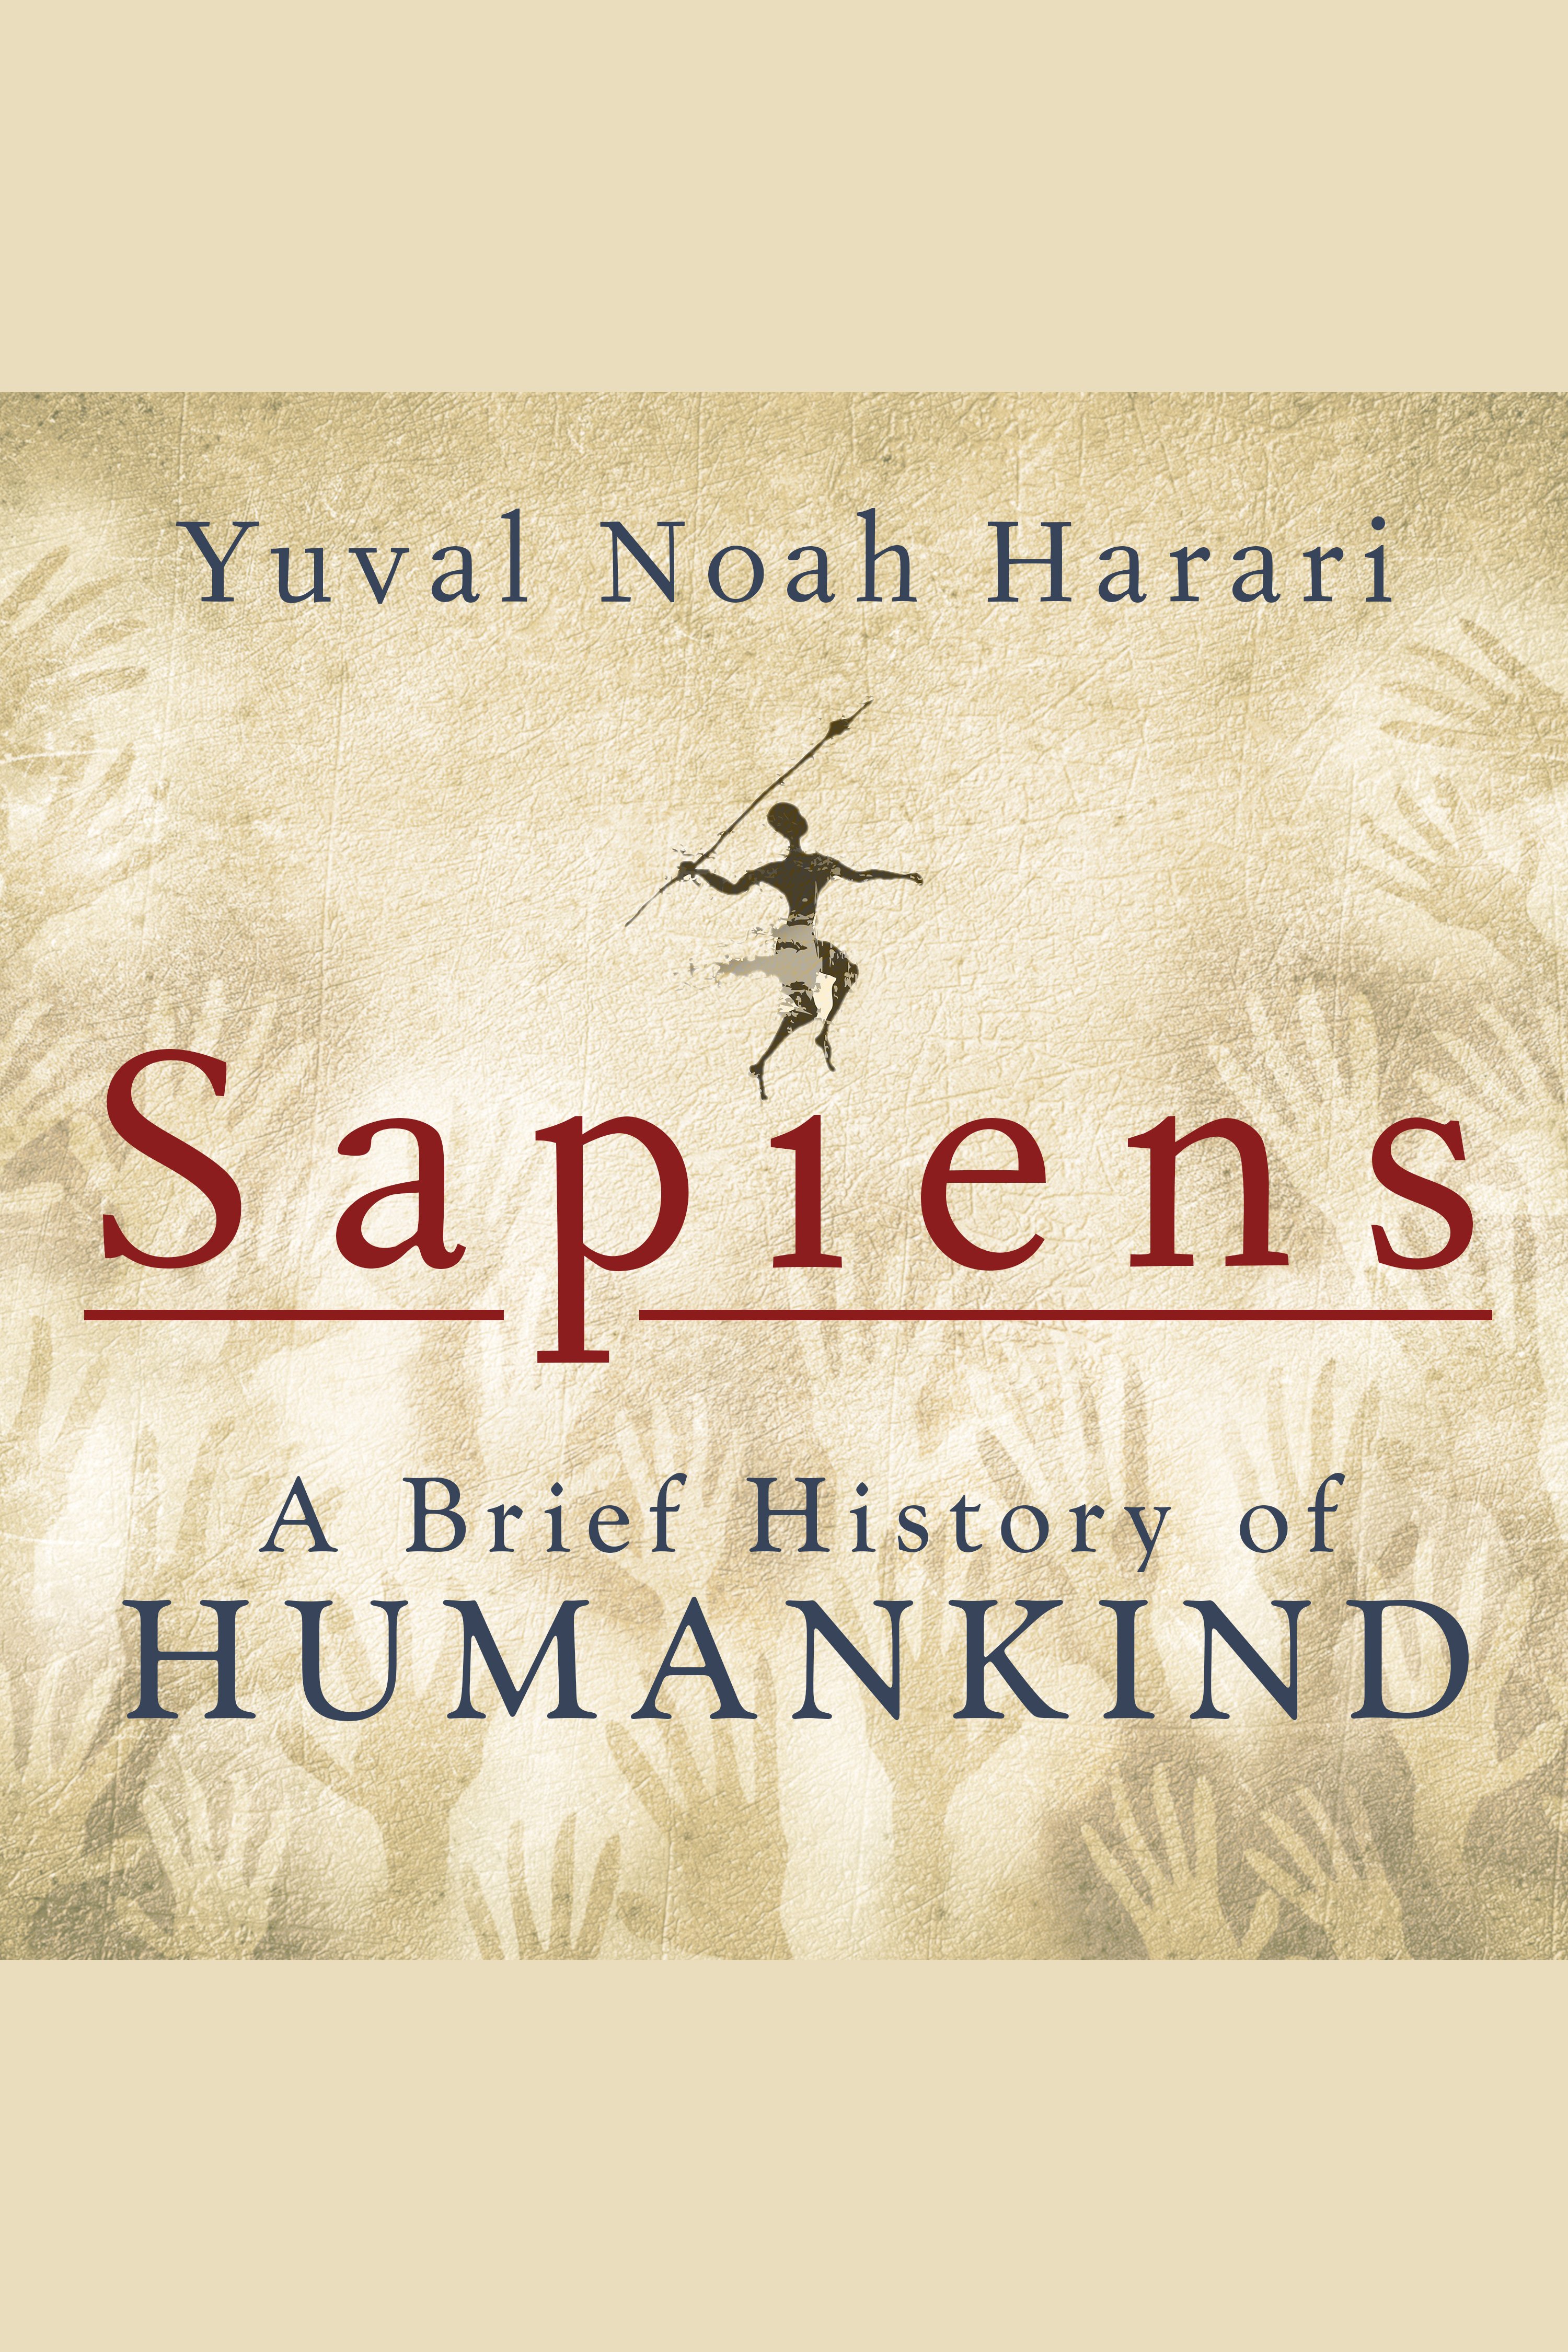 Sapiens [electronic resource] : A Brief History of Humankind